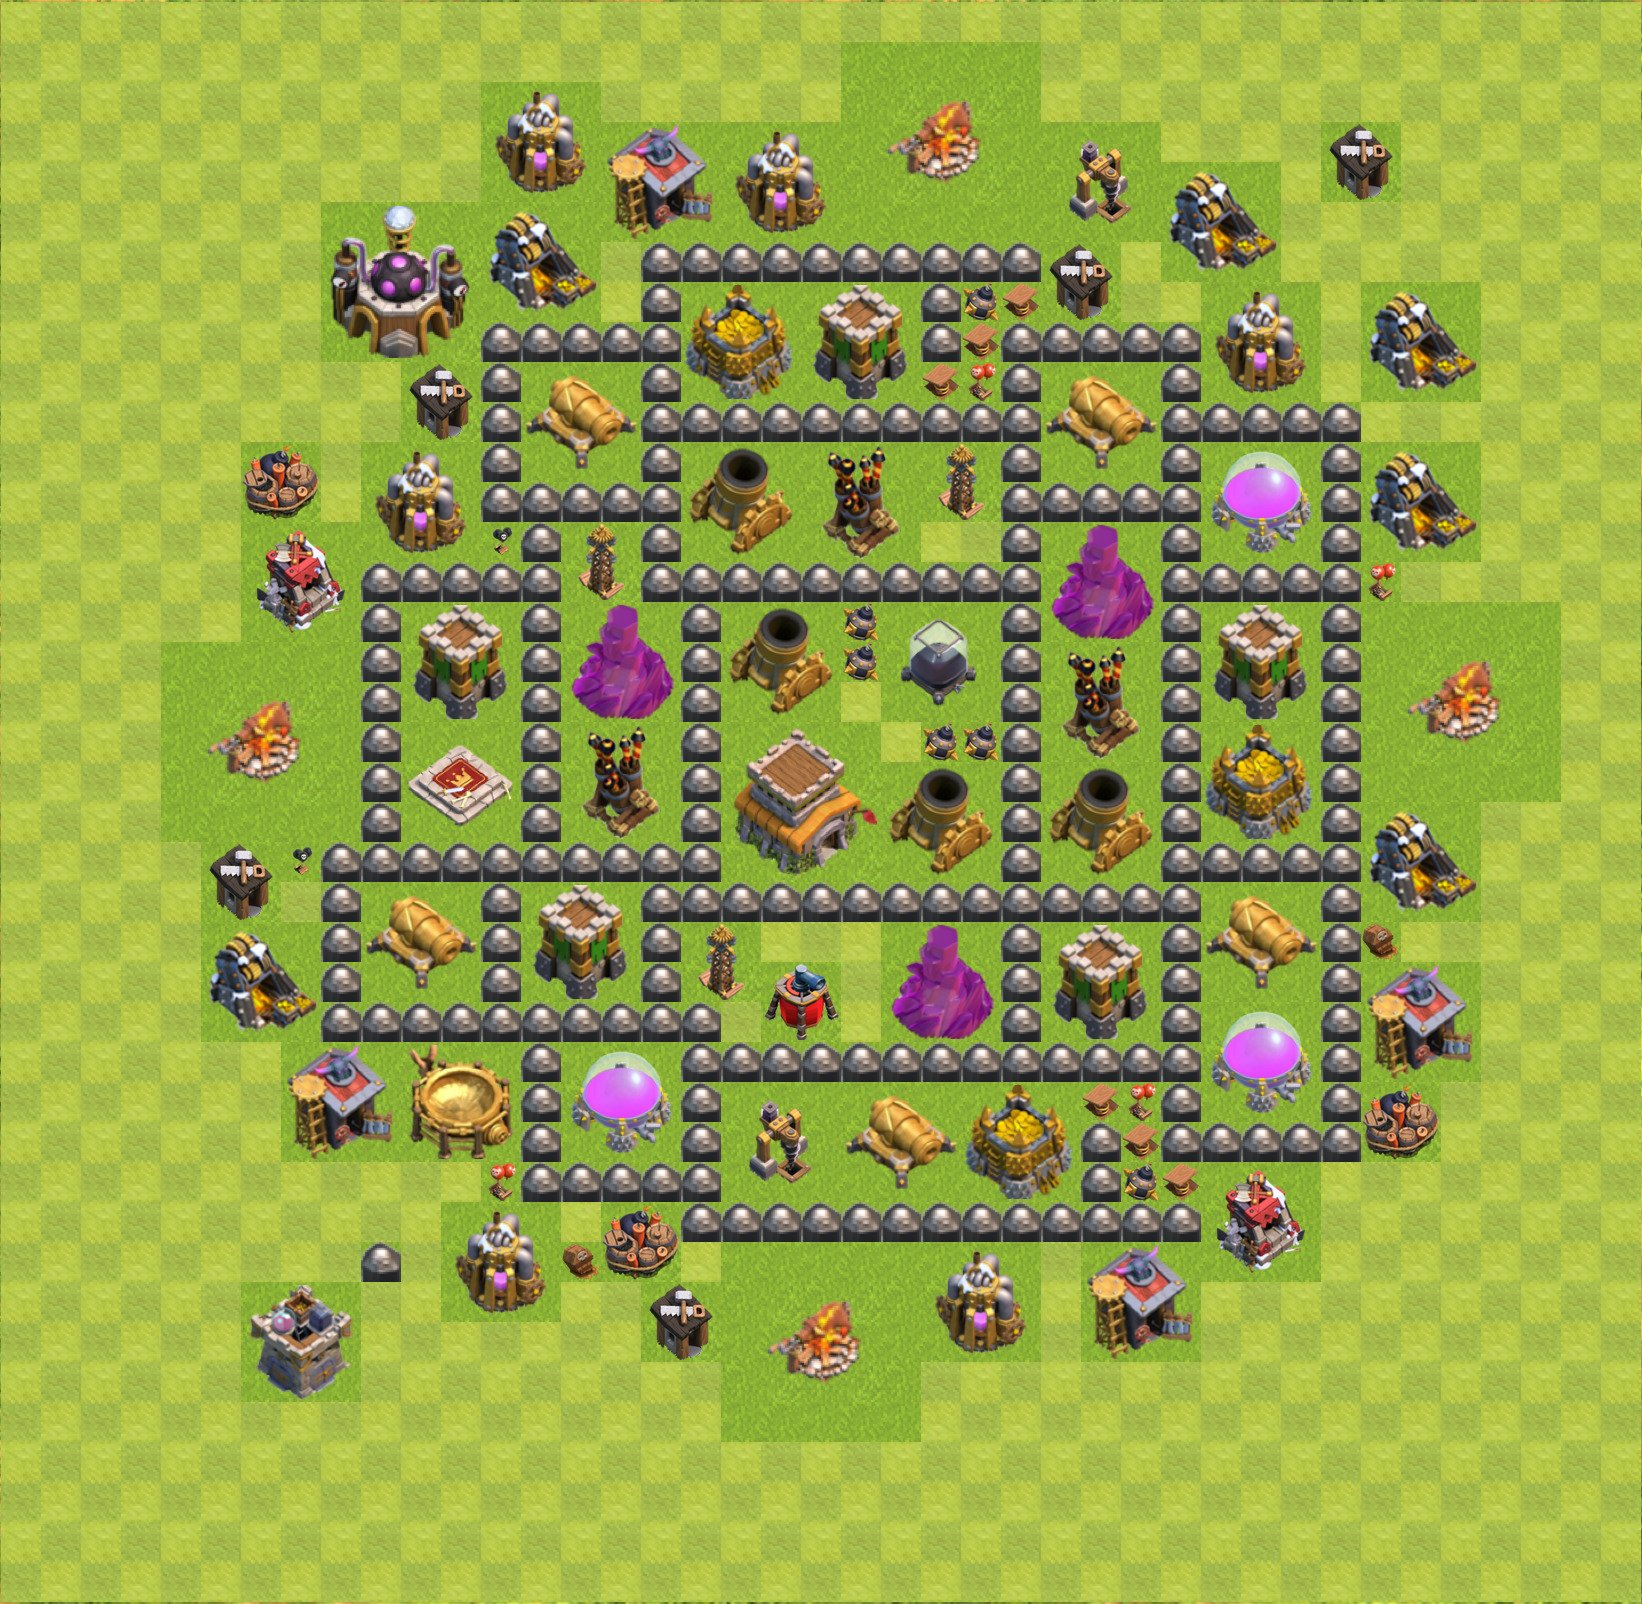 Lvl 8 layout  Clash of clans, Clash of clans game, Clash of clans hack